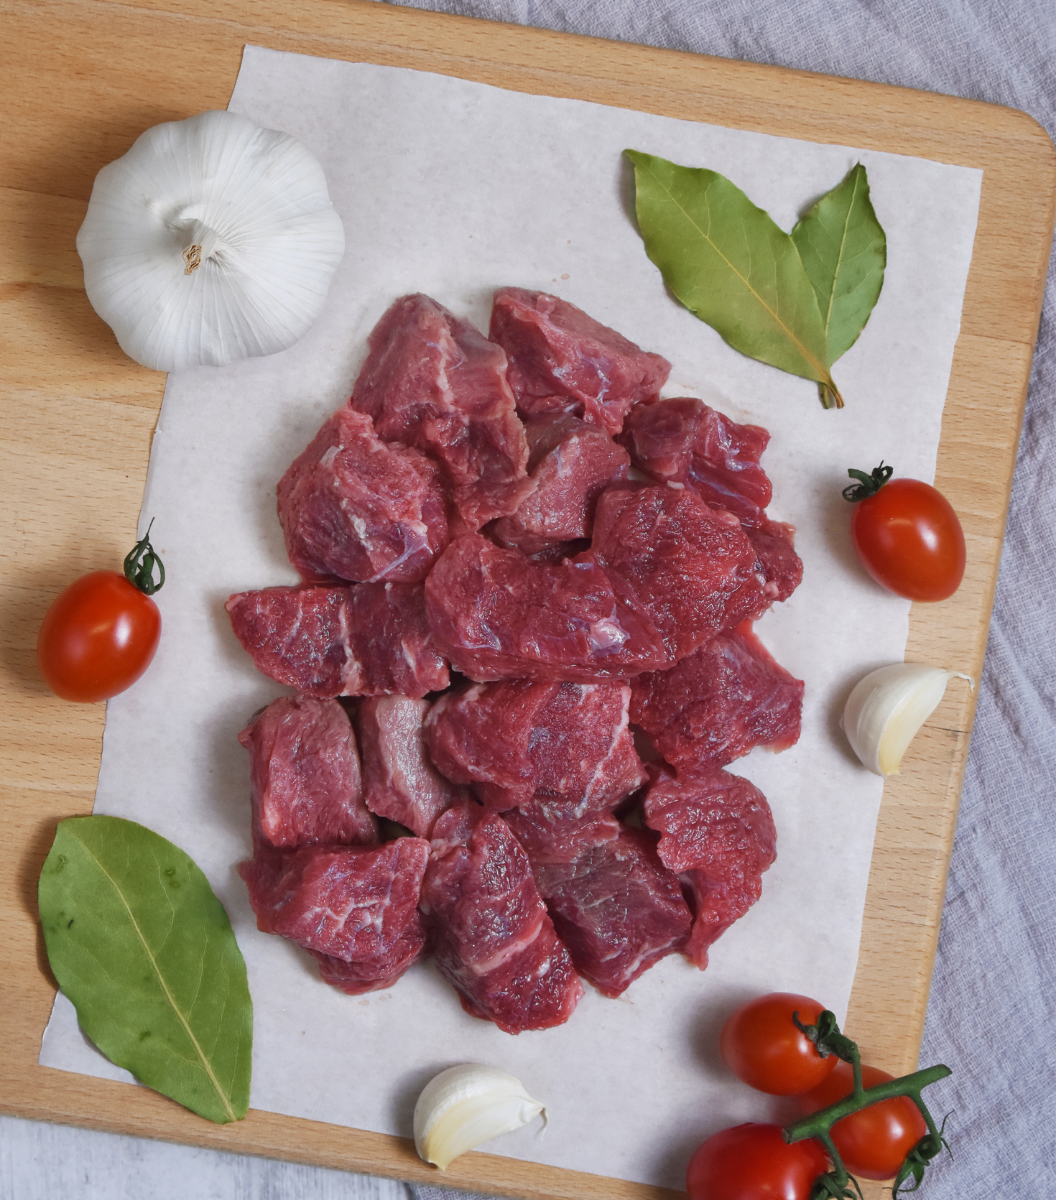 A large portion of fresh New Zealand Angus diced beef with garlic, red grape tomato and bay leaves by the side